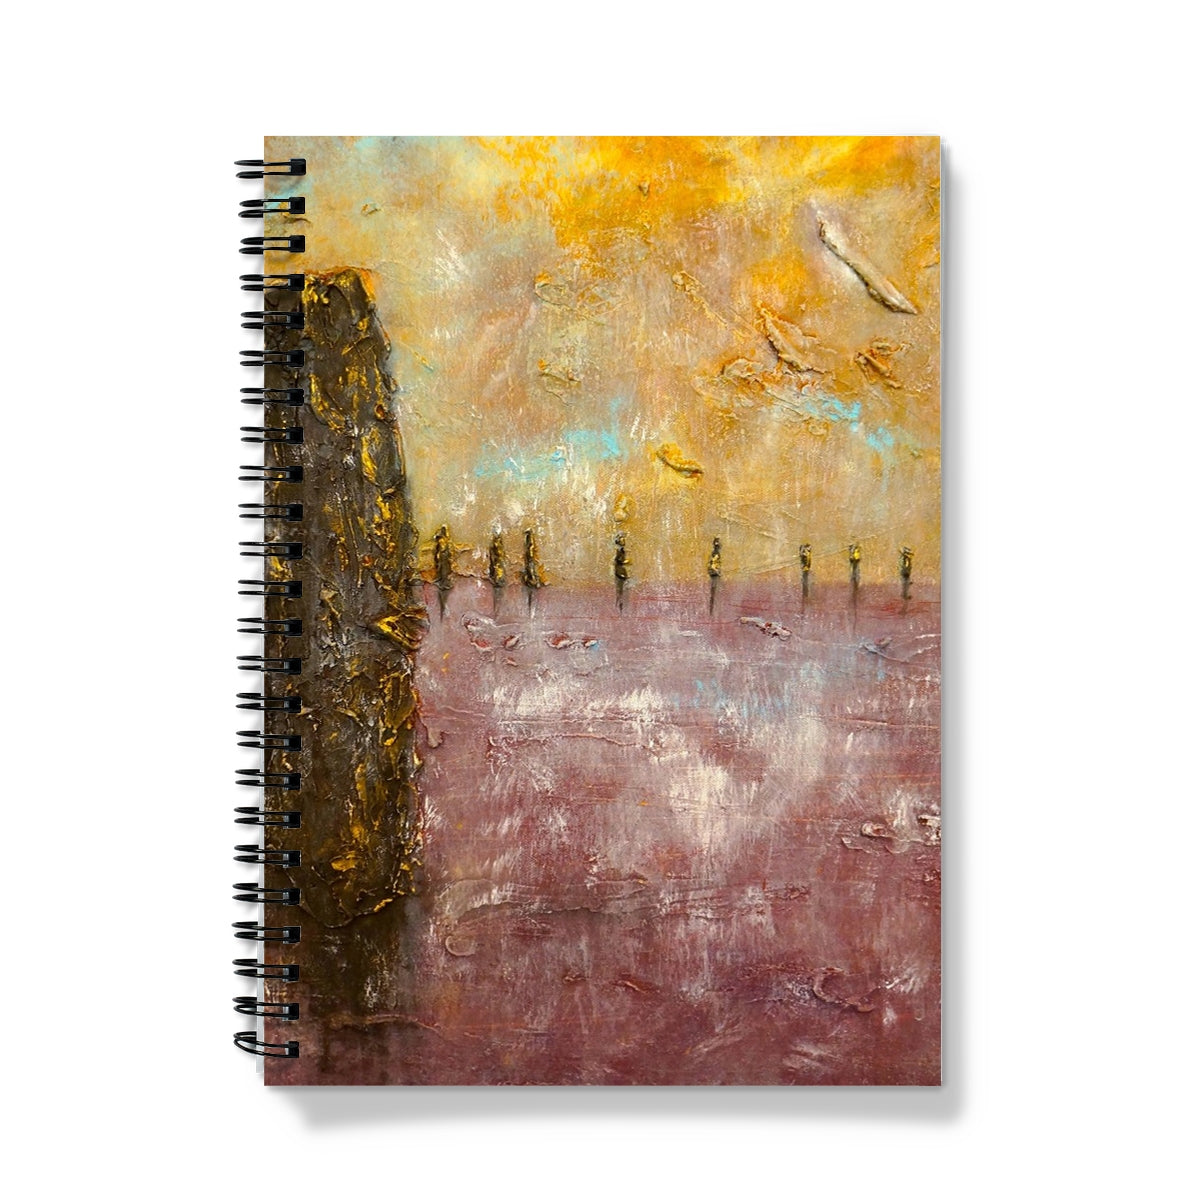 Bordgar Mist Orkney Art Gifts Notebook-Journals & Notebooks-Orkney Art Gallery-A5-Graph-Paintings, Prints, Homeware, Art Gifts From Scotland By Scottish Artist Kevin Hunter